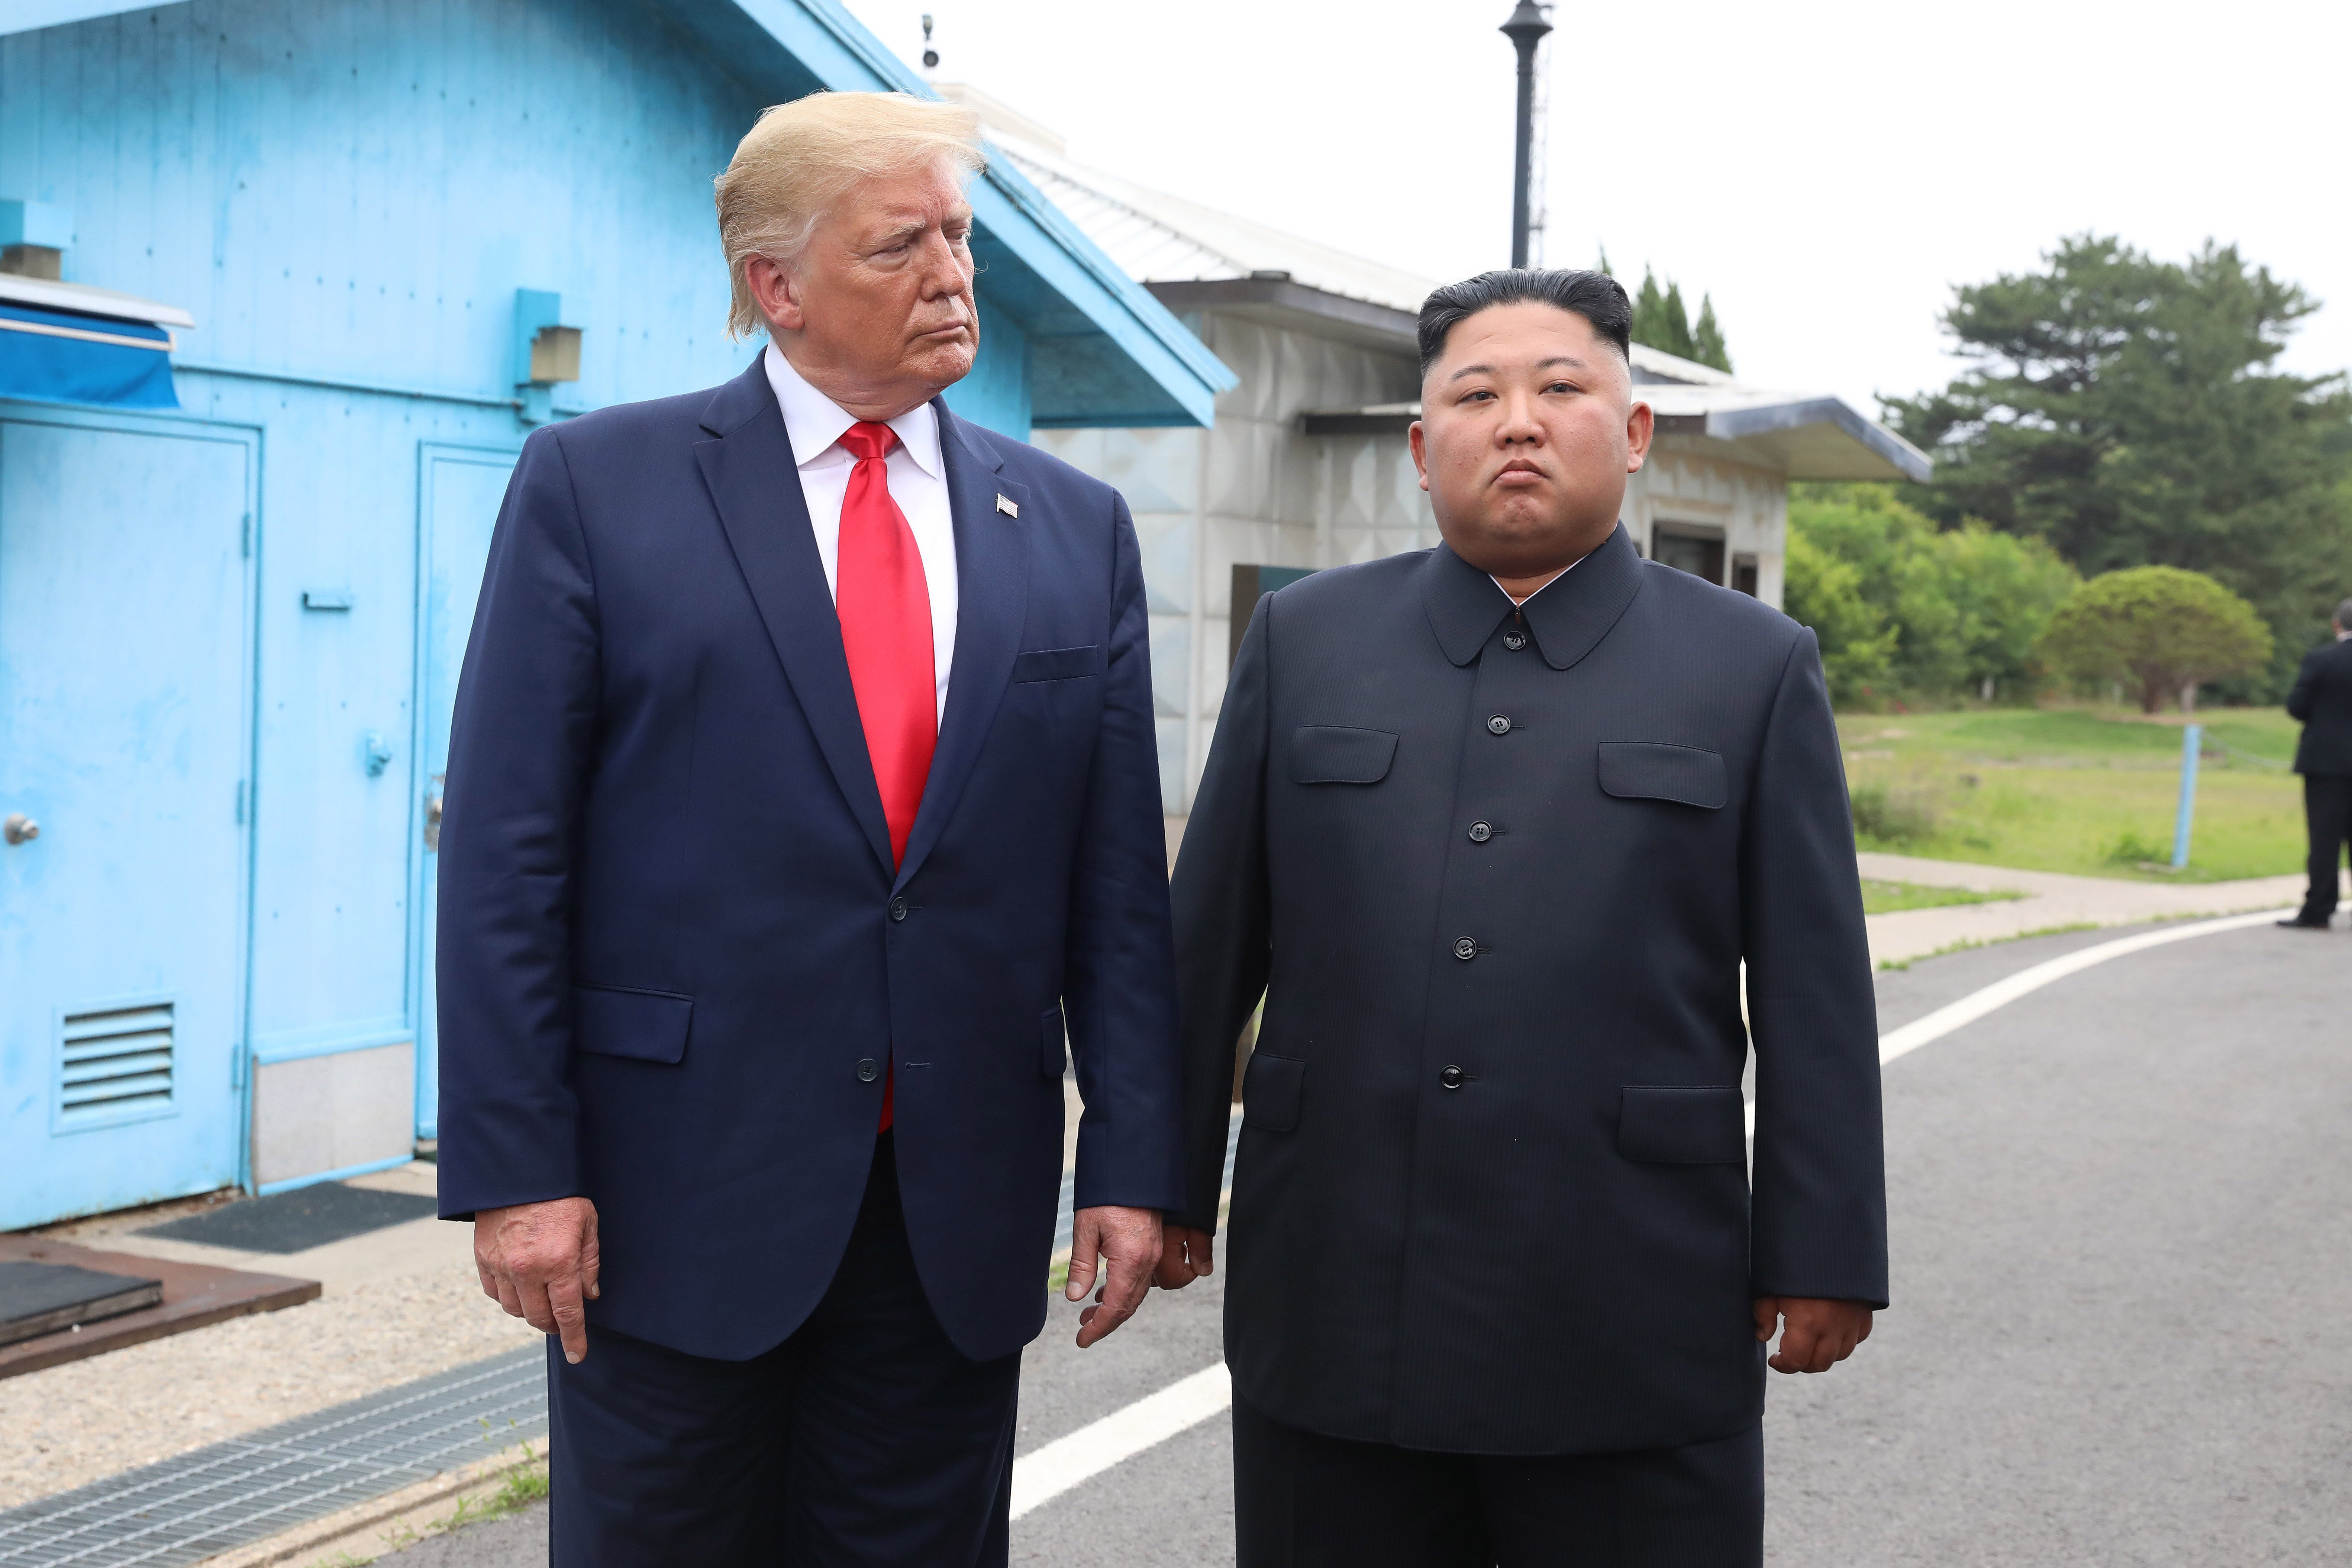 Donald Trump and Kim Jong-un posing for the cameras at the Korean demilitarized zone | Photo: Getty Images